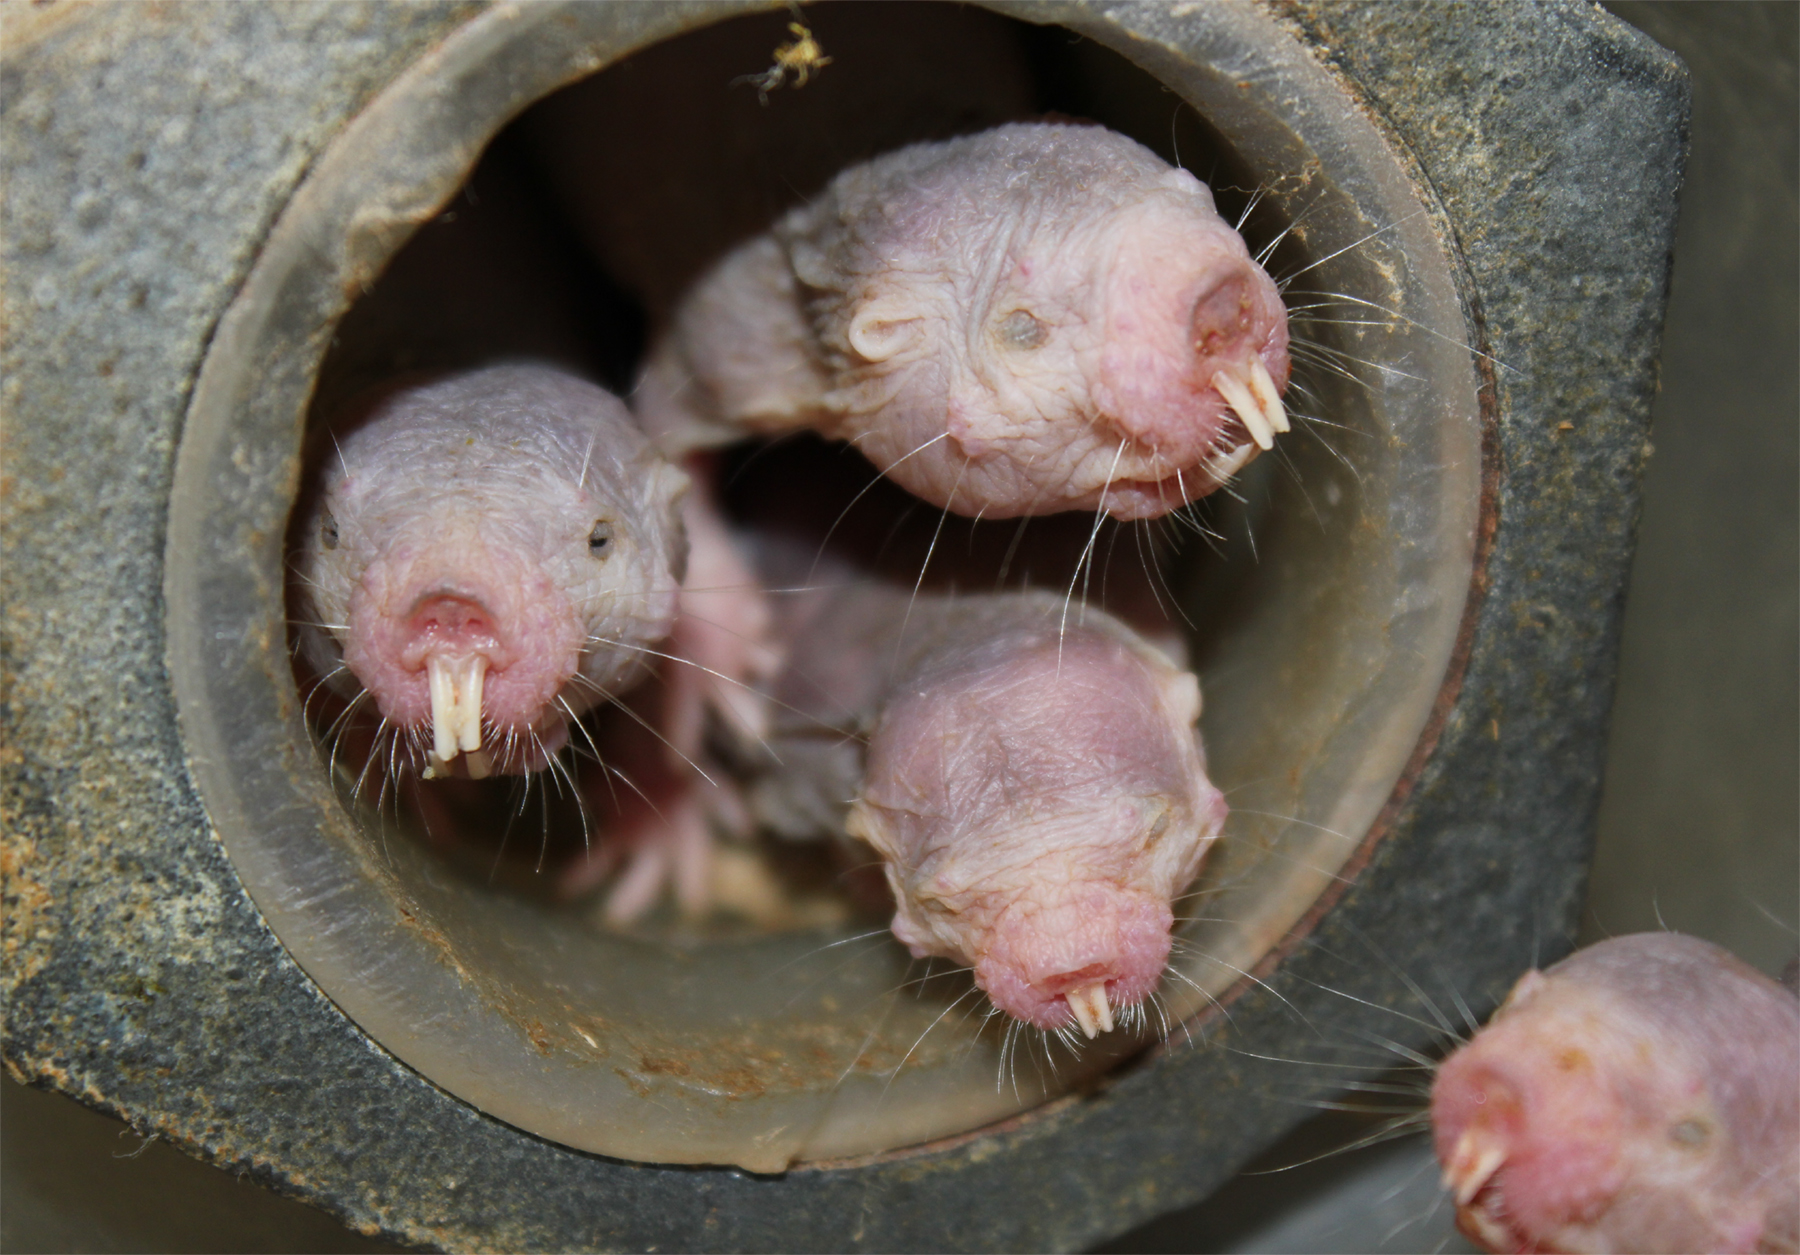 Here’s How Naked Mole Rats Can Survive 18 Minutes Without Oxygen